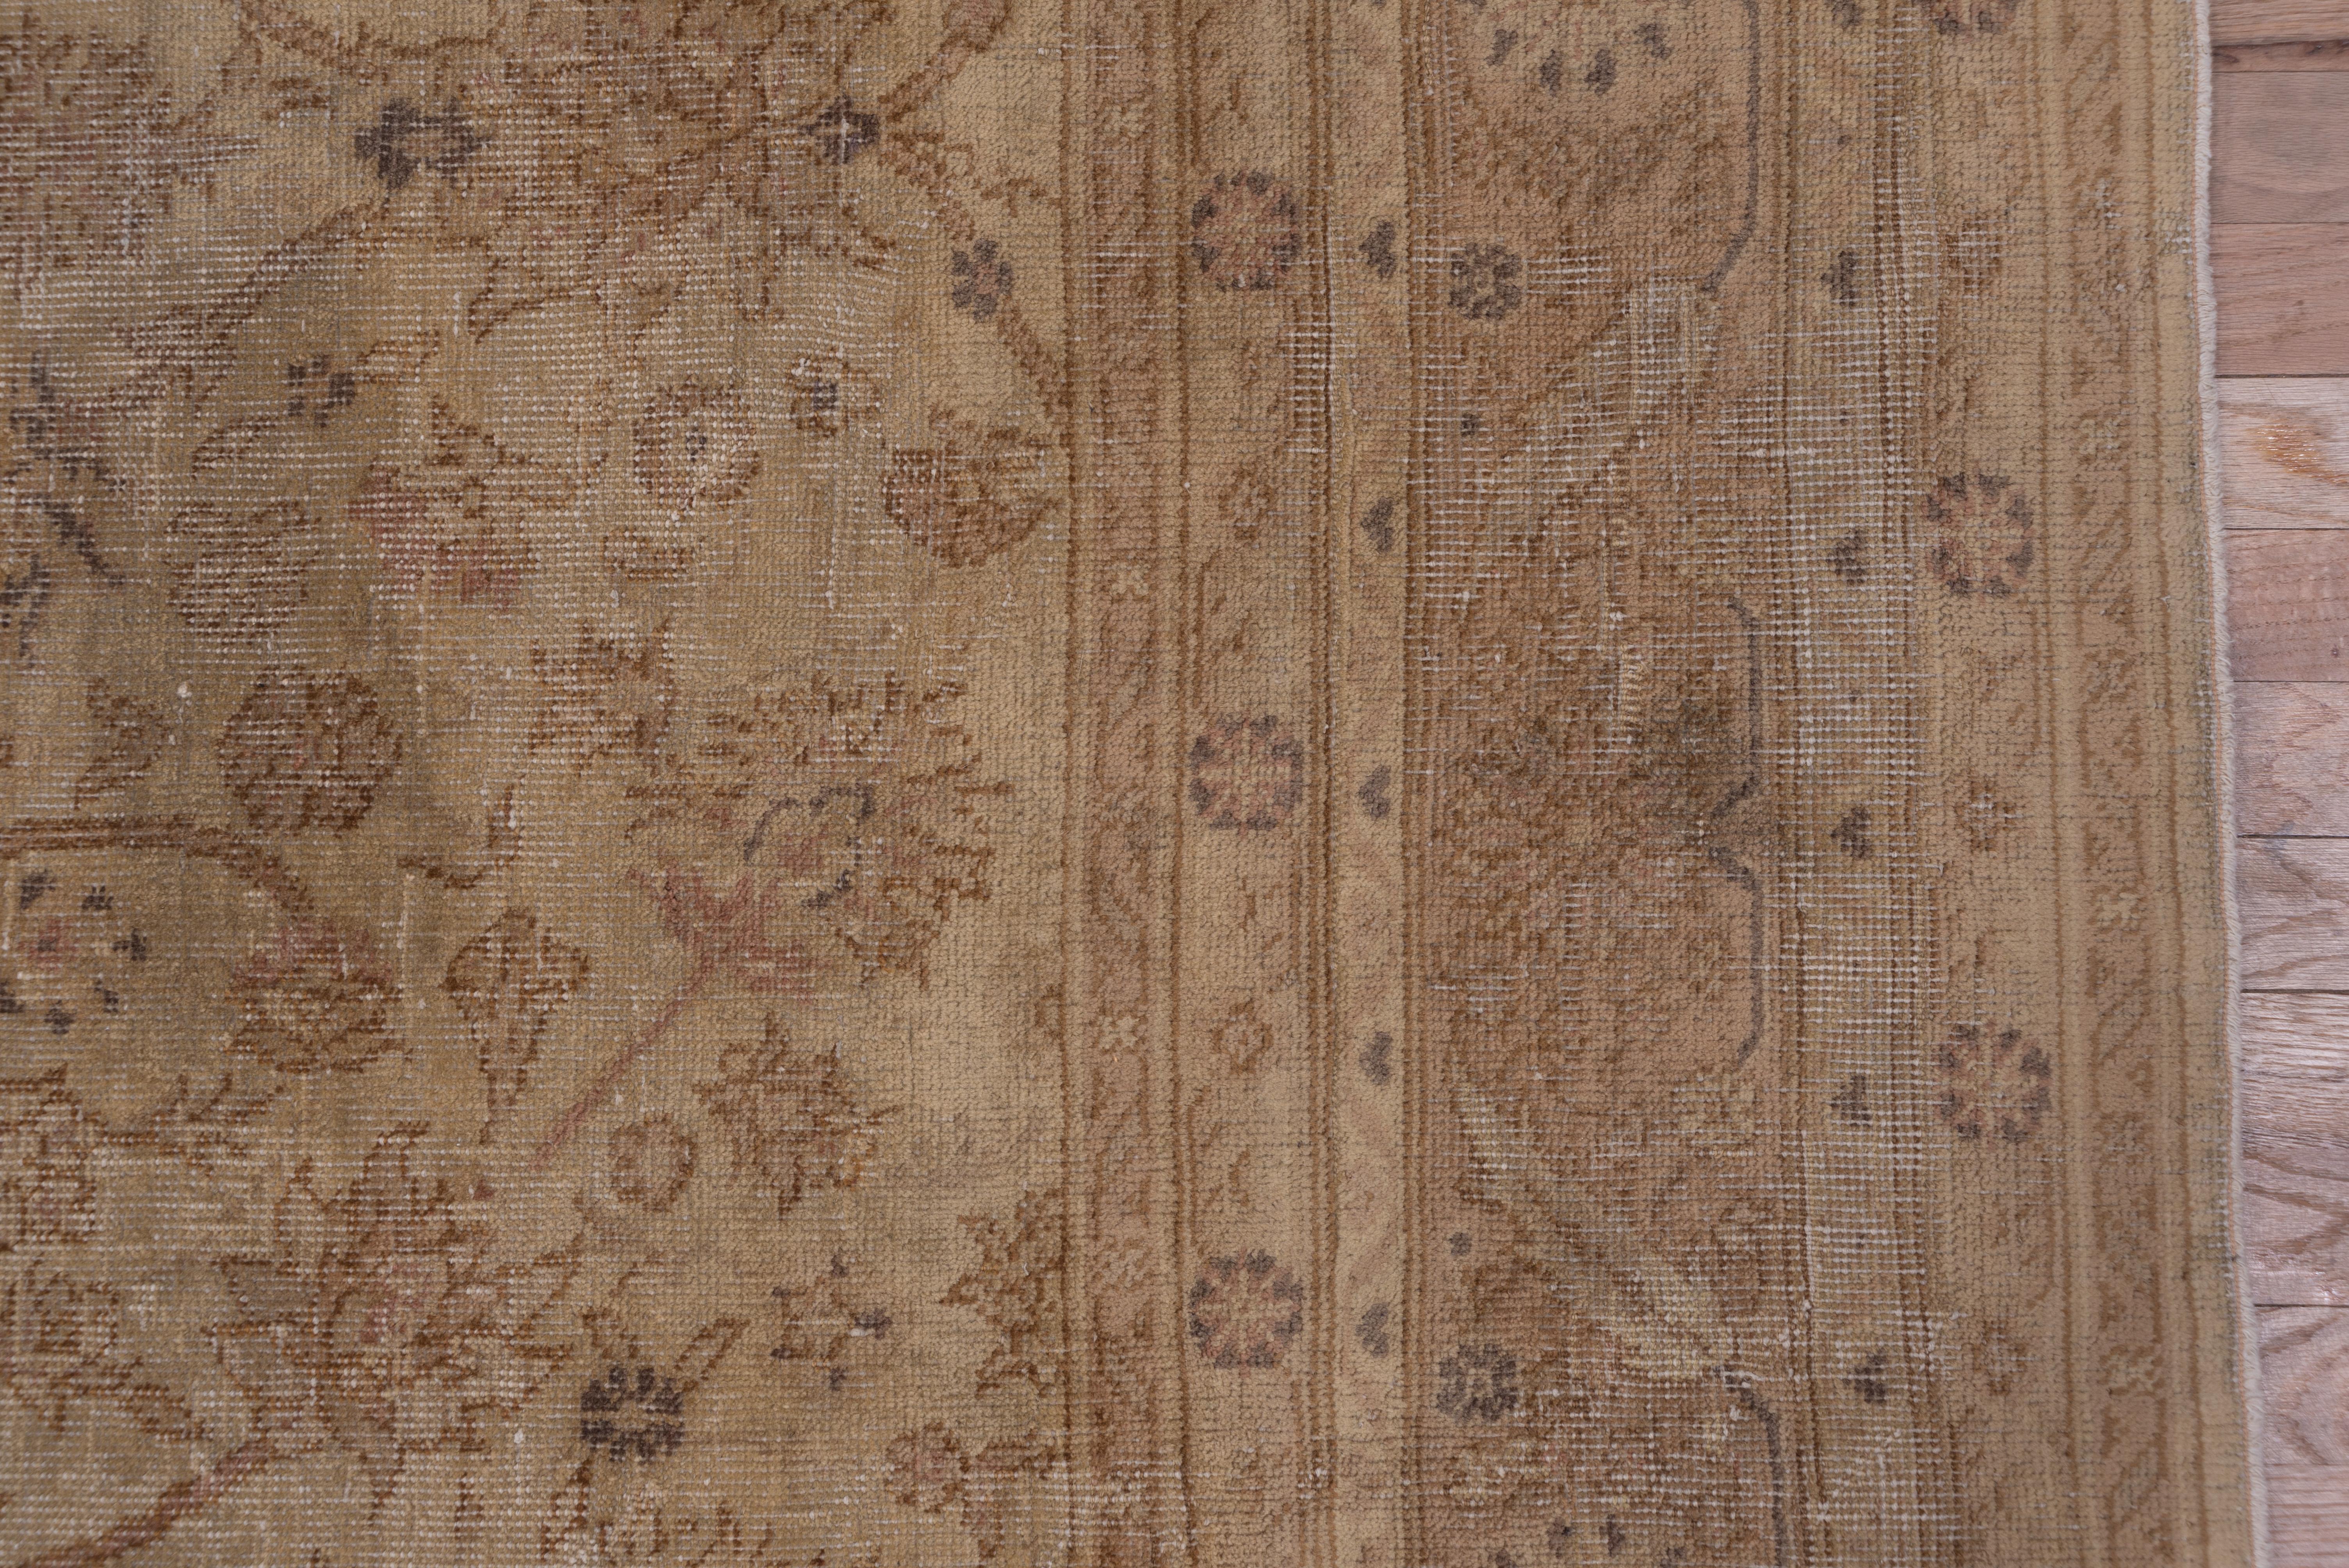 The beige field shows a centralized pattern of two layers of long rinceaux and concave diamonds decorated by a somewhat spacious design of small palmettes and related floriate elements border of rosettes and slanted barbed leaves. Brown and tan